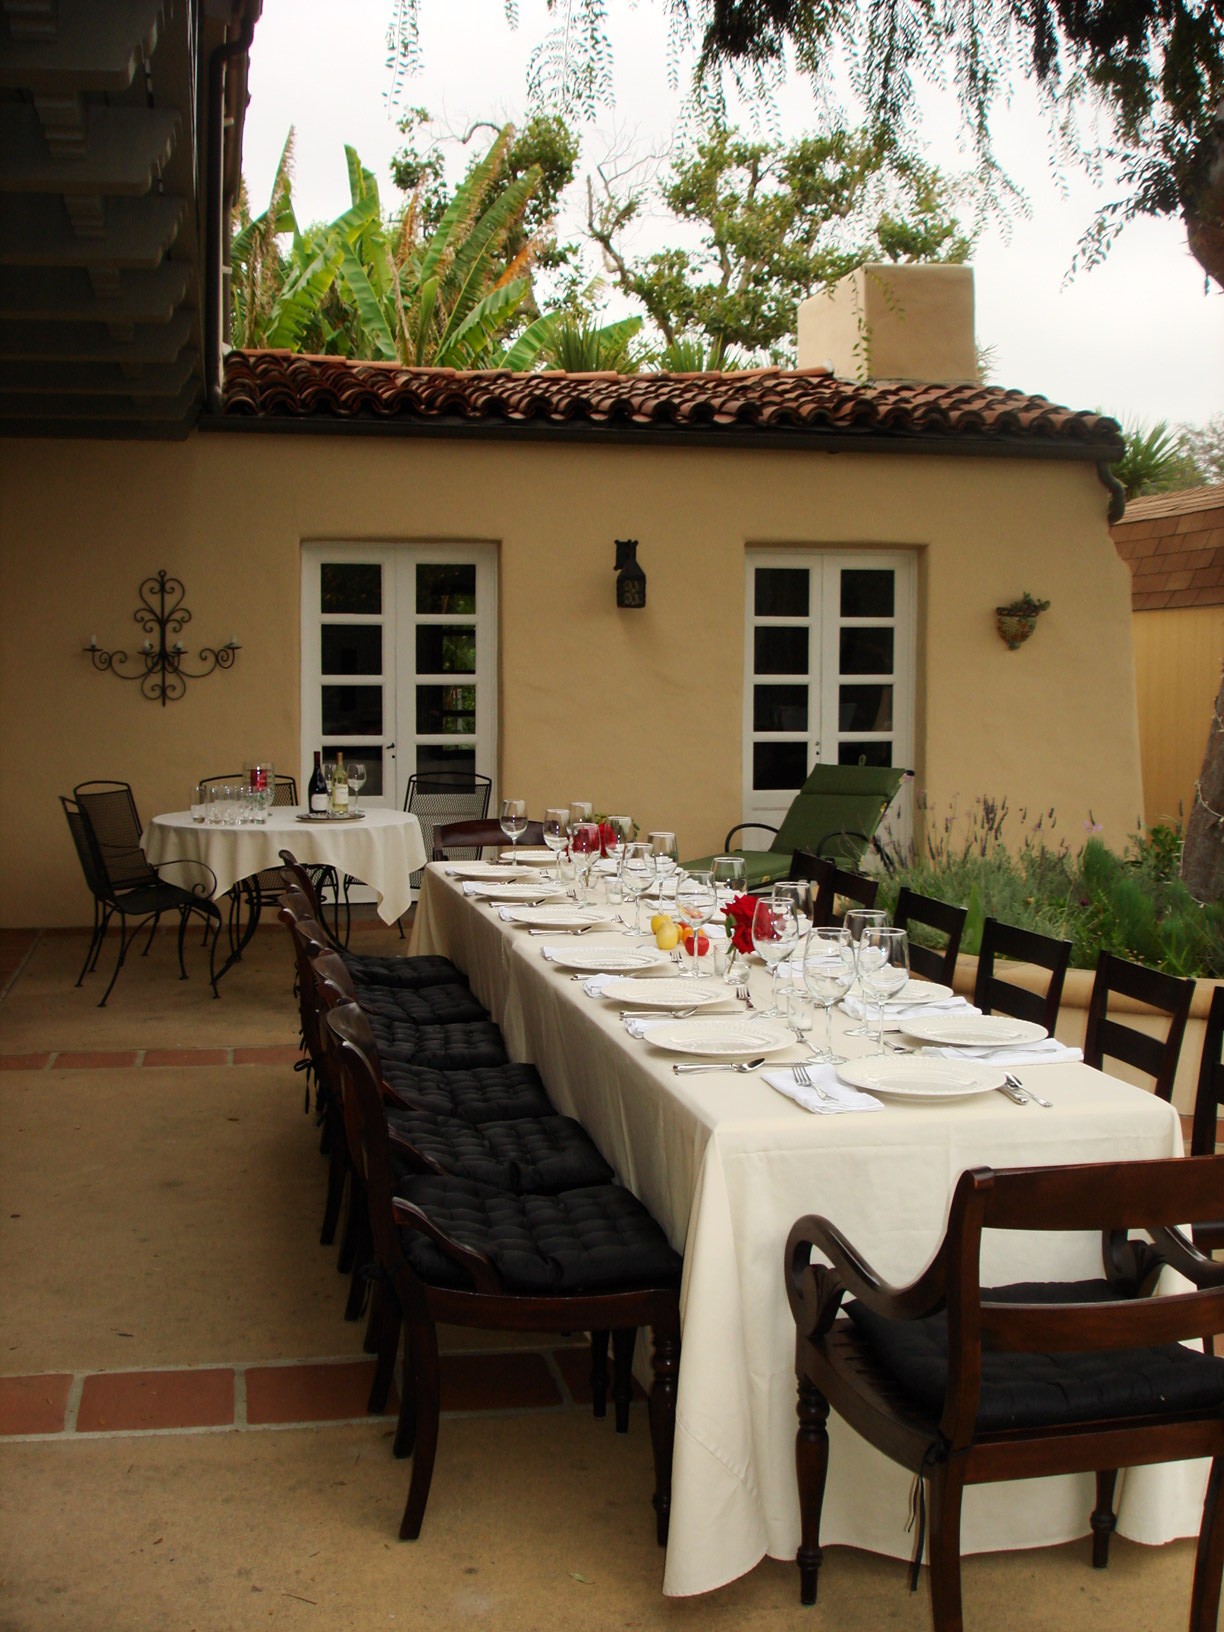 Courtyard dining